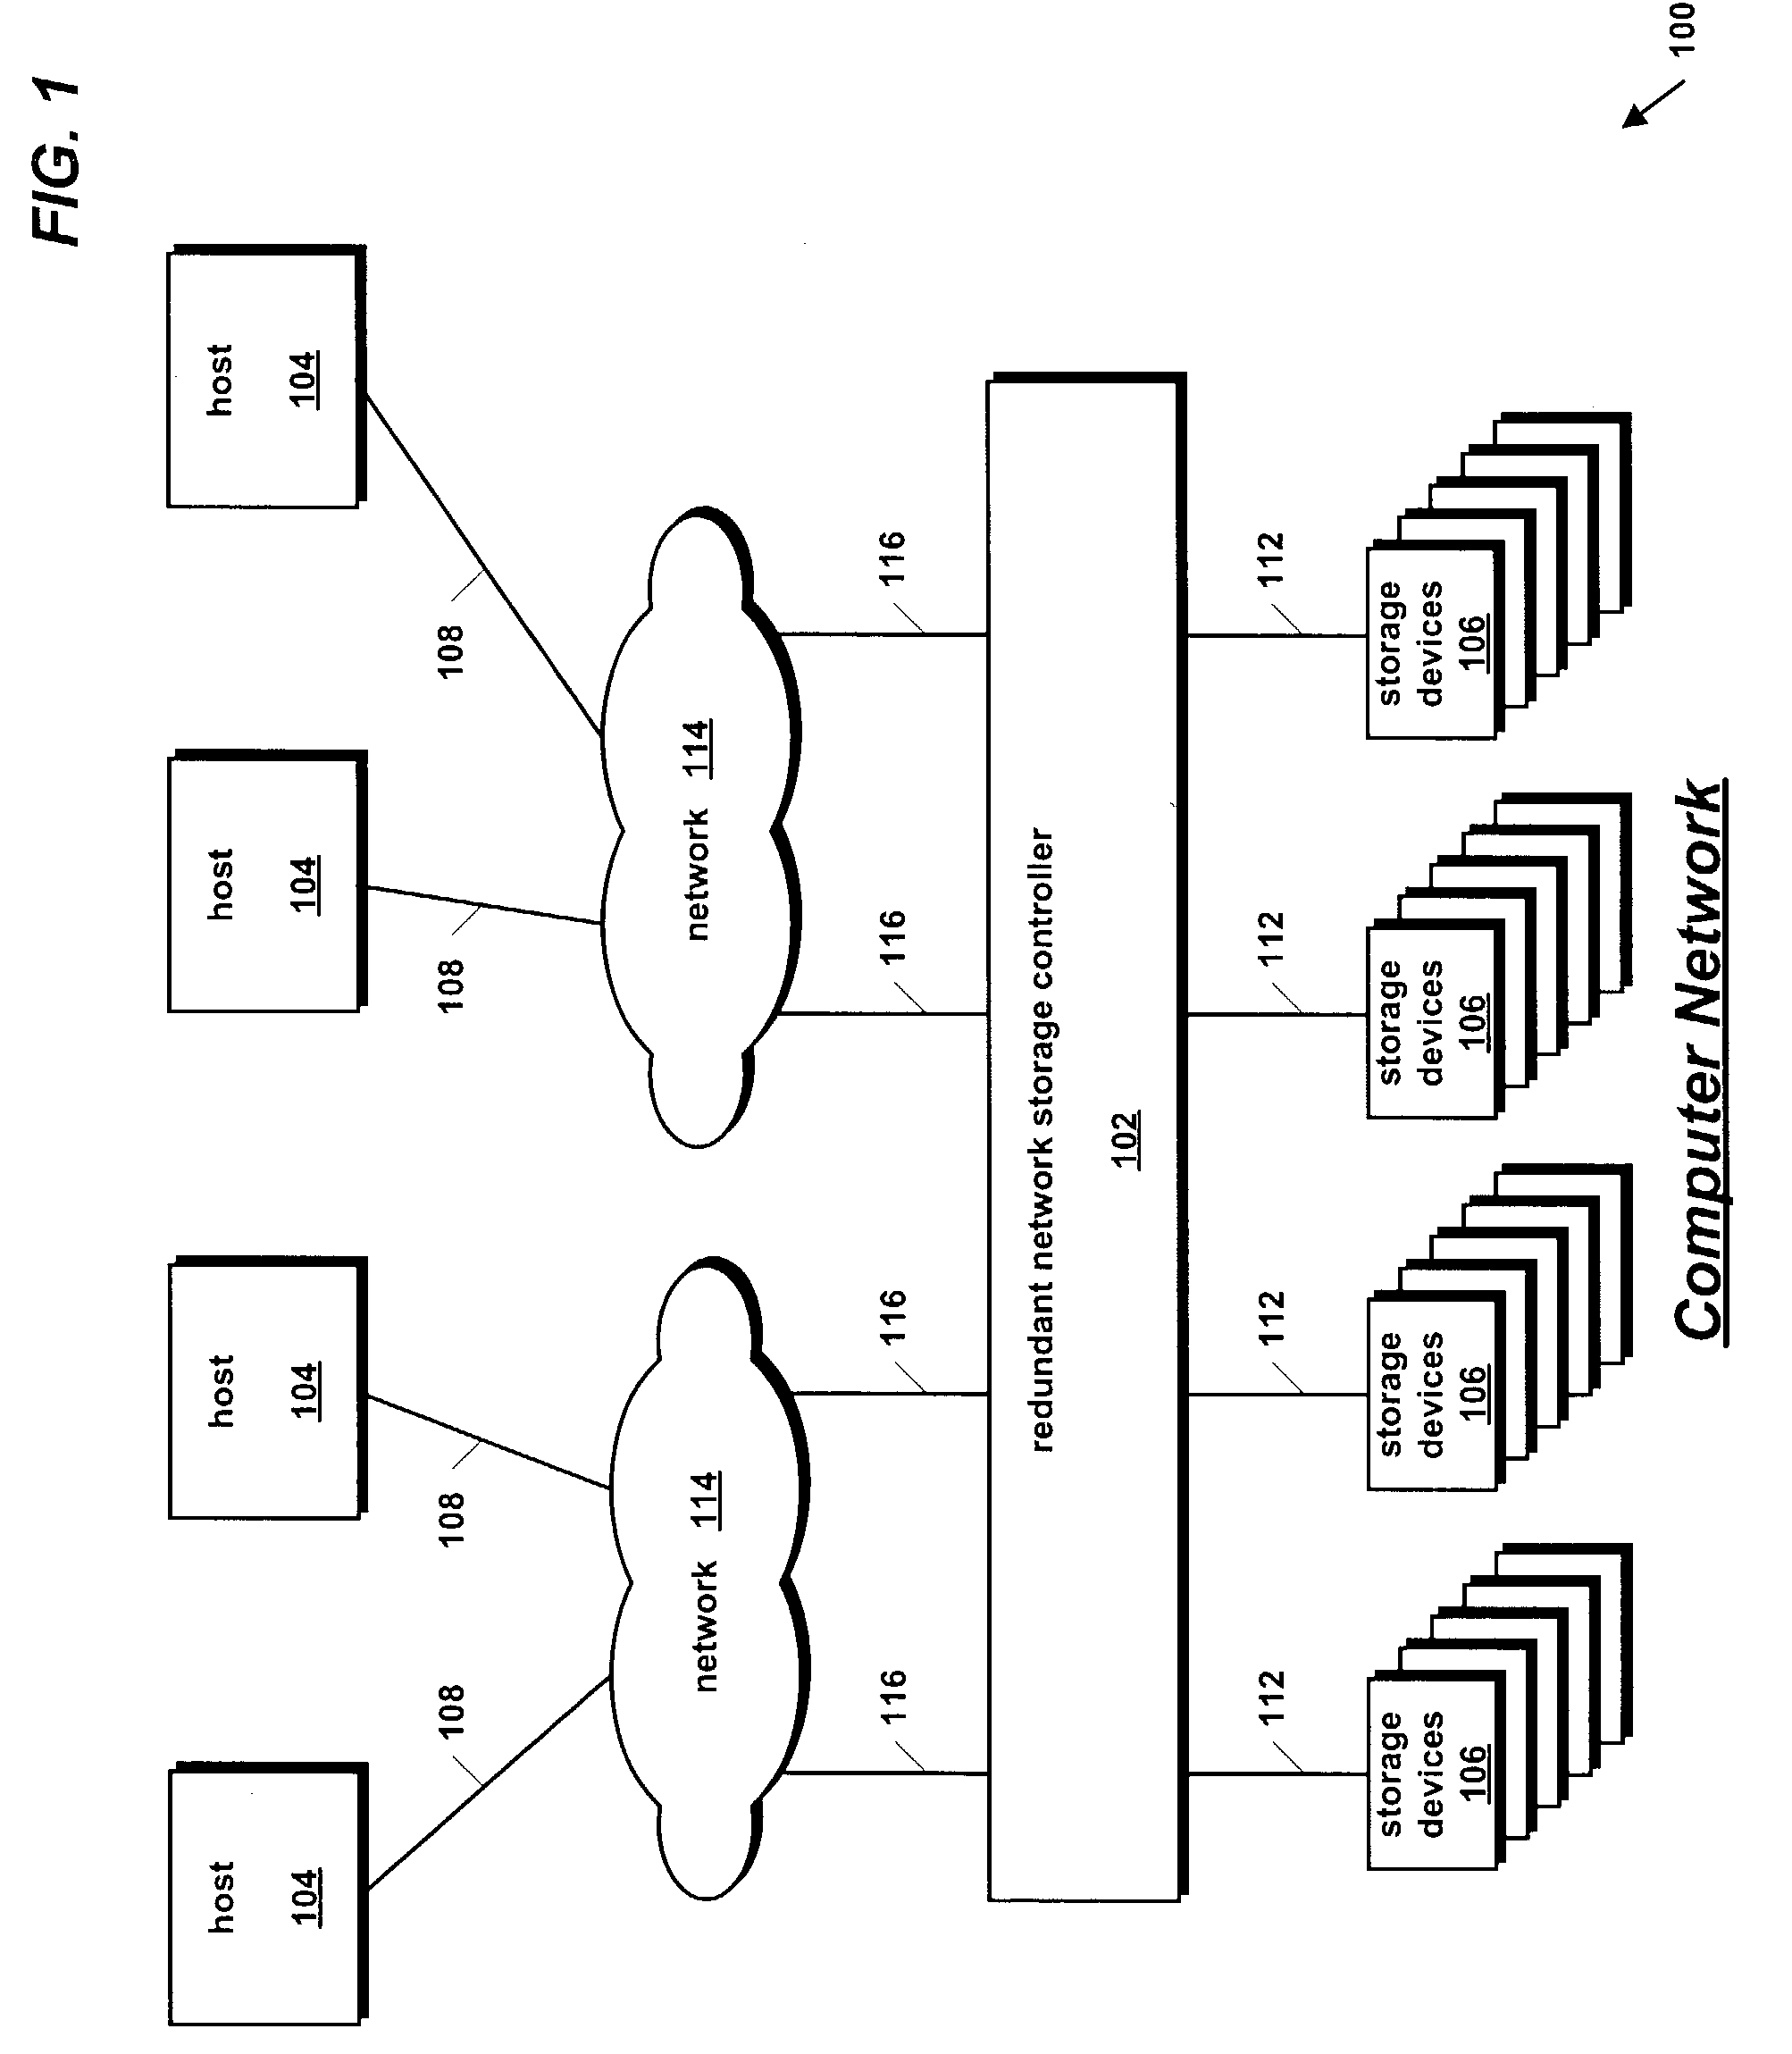 Broadcast bridge apparatus for transferring data to redundant memory subsystems in a storage controller